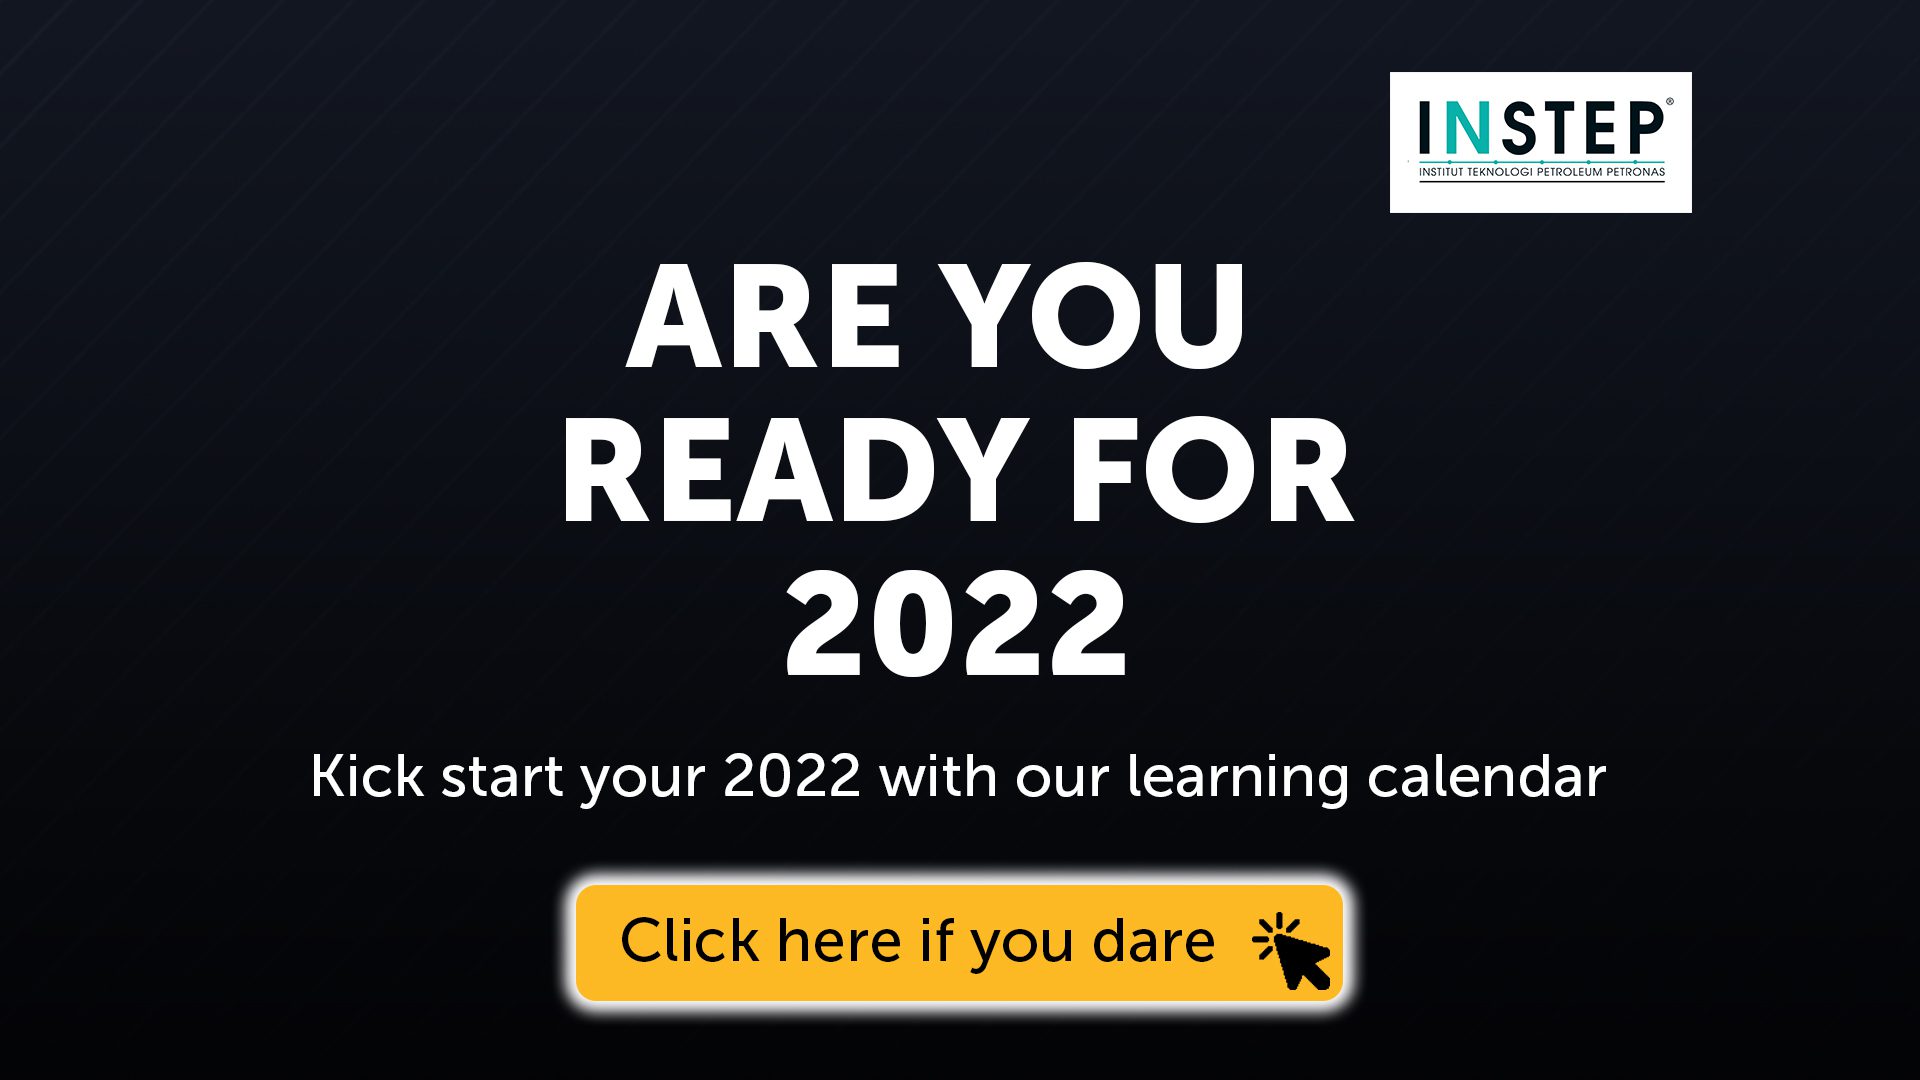 Our surprise is finally here! Announcing INSTEP Learning Calendar 2022